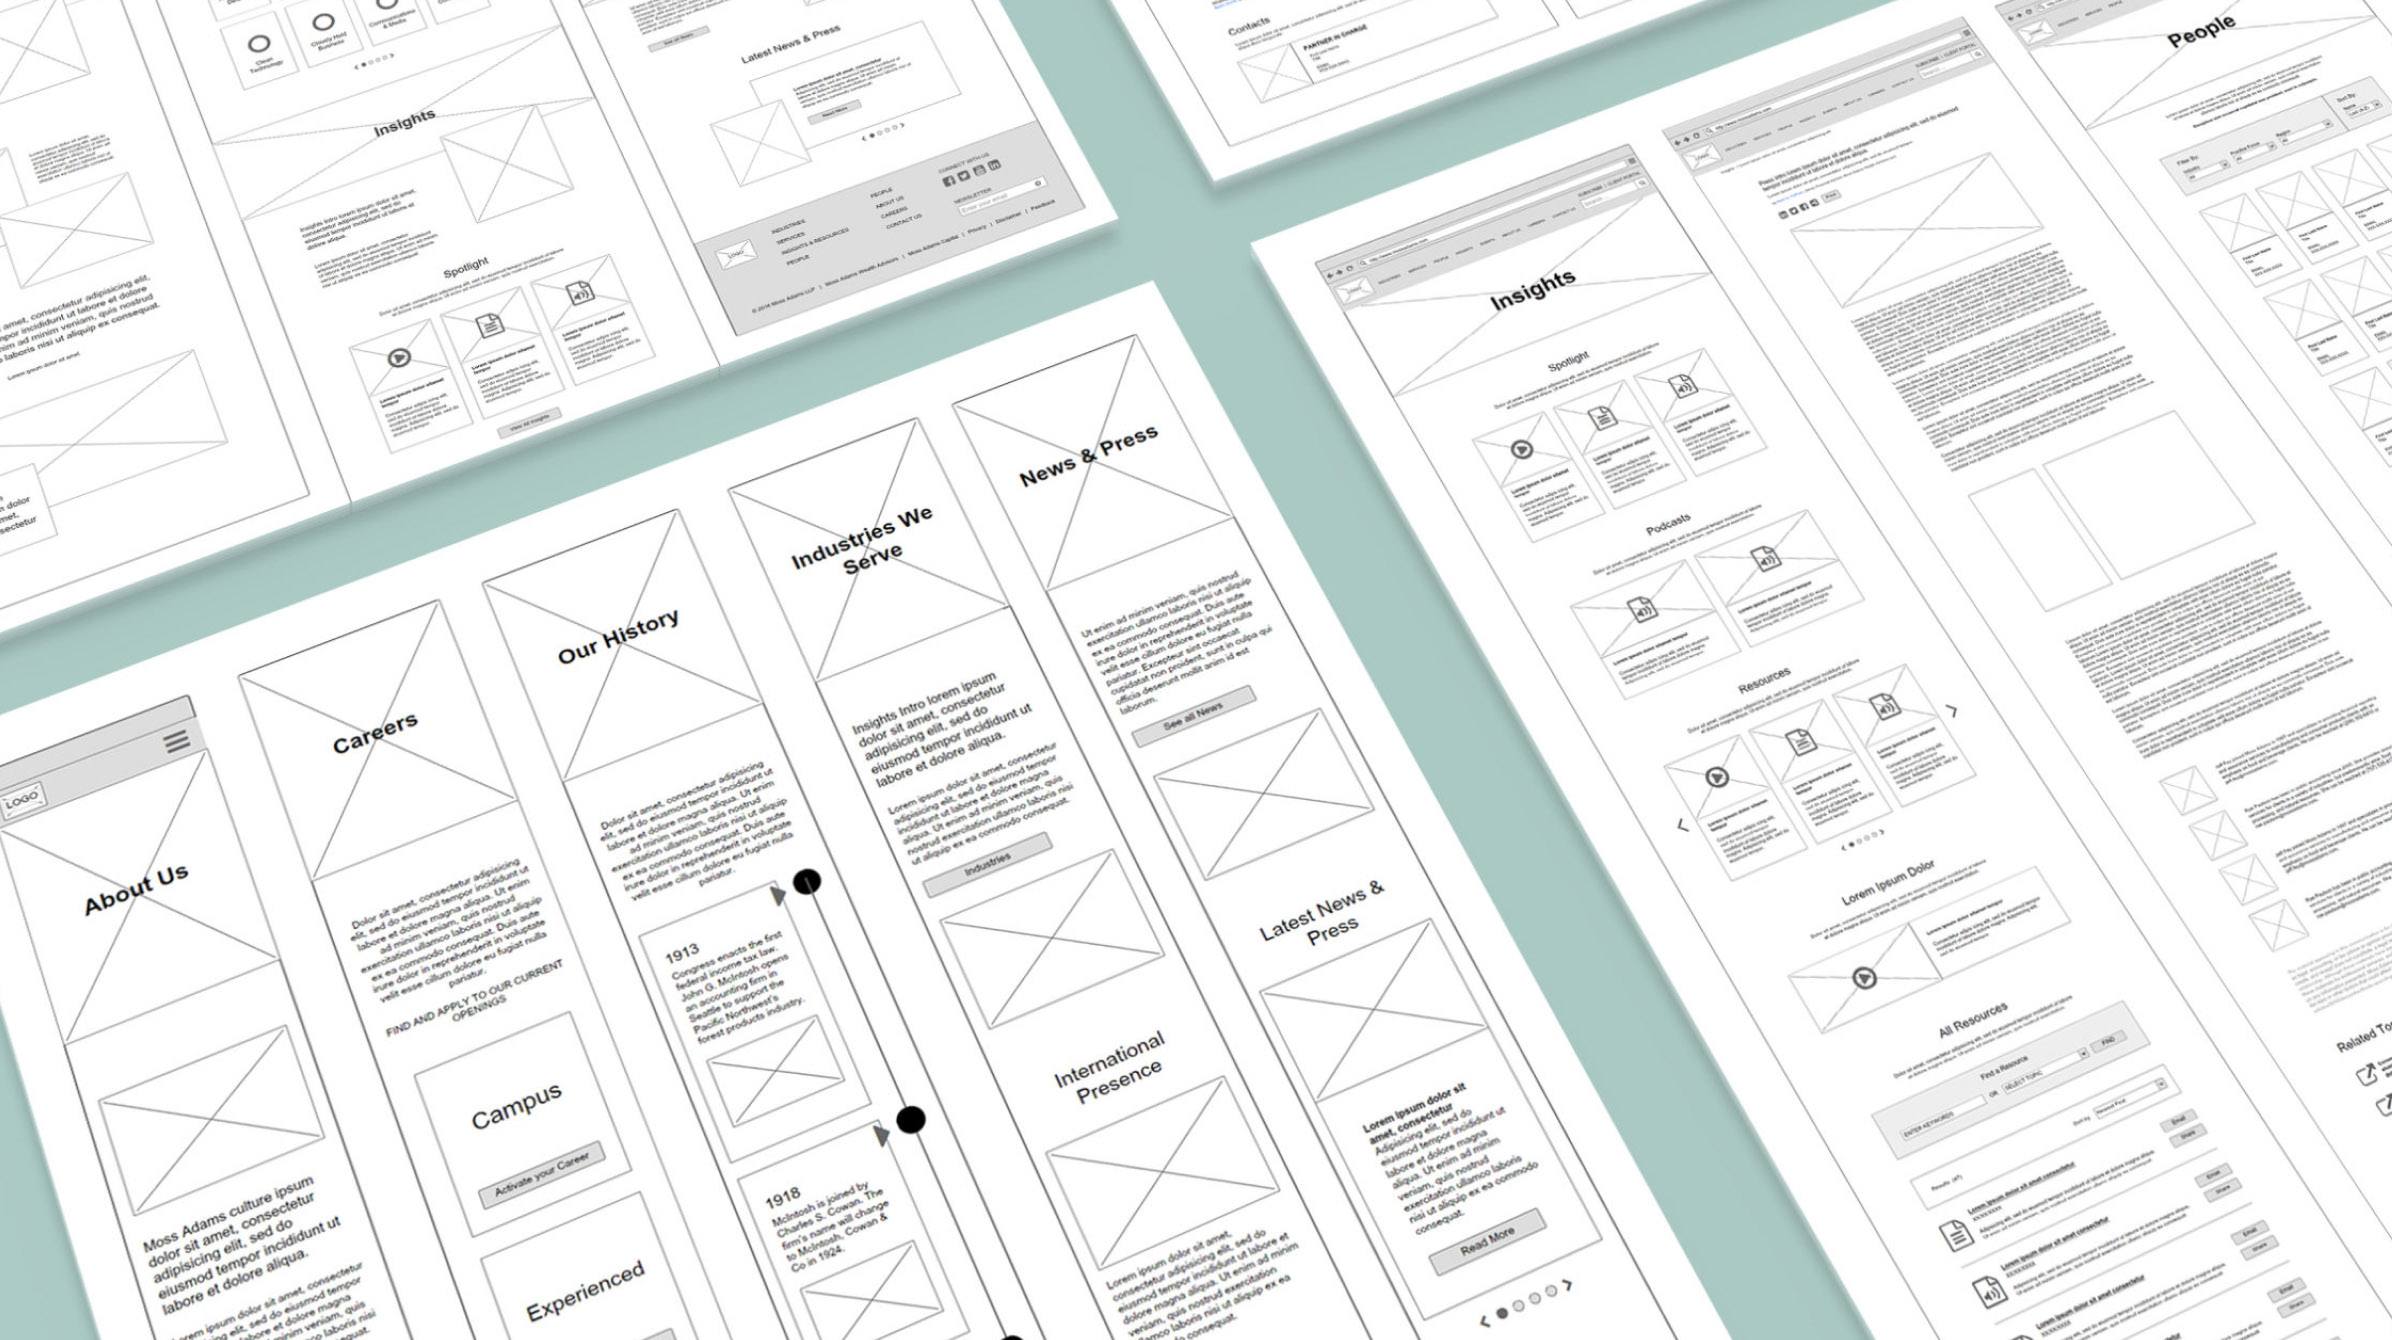 Website design involves wireframes, or blueprints for fully-realized pages.